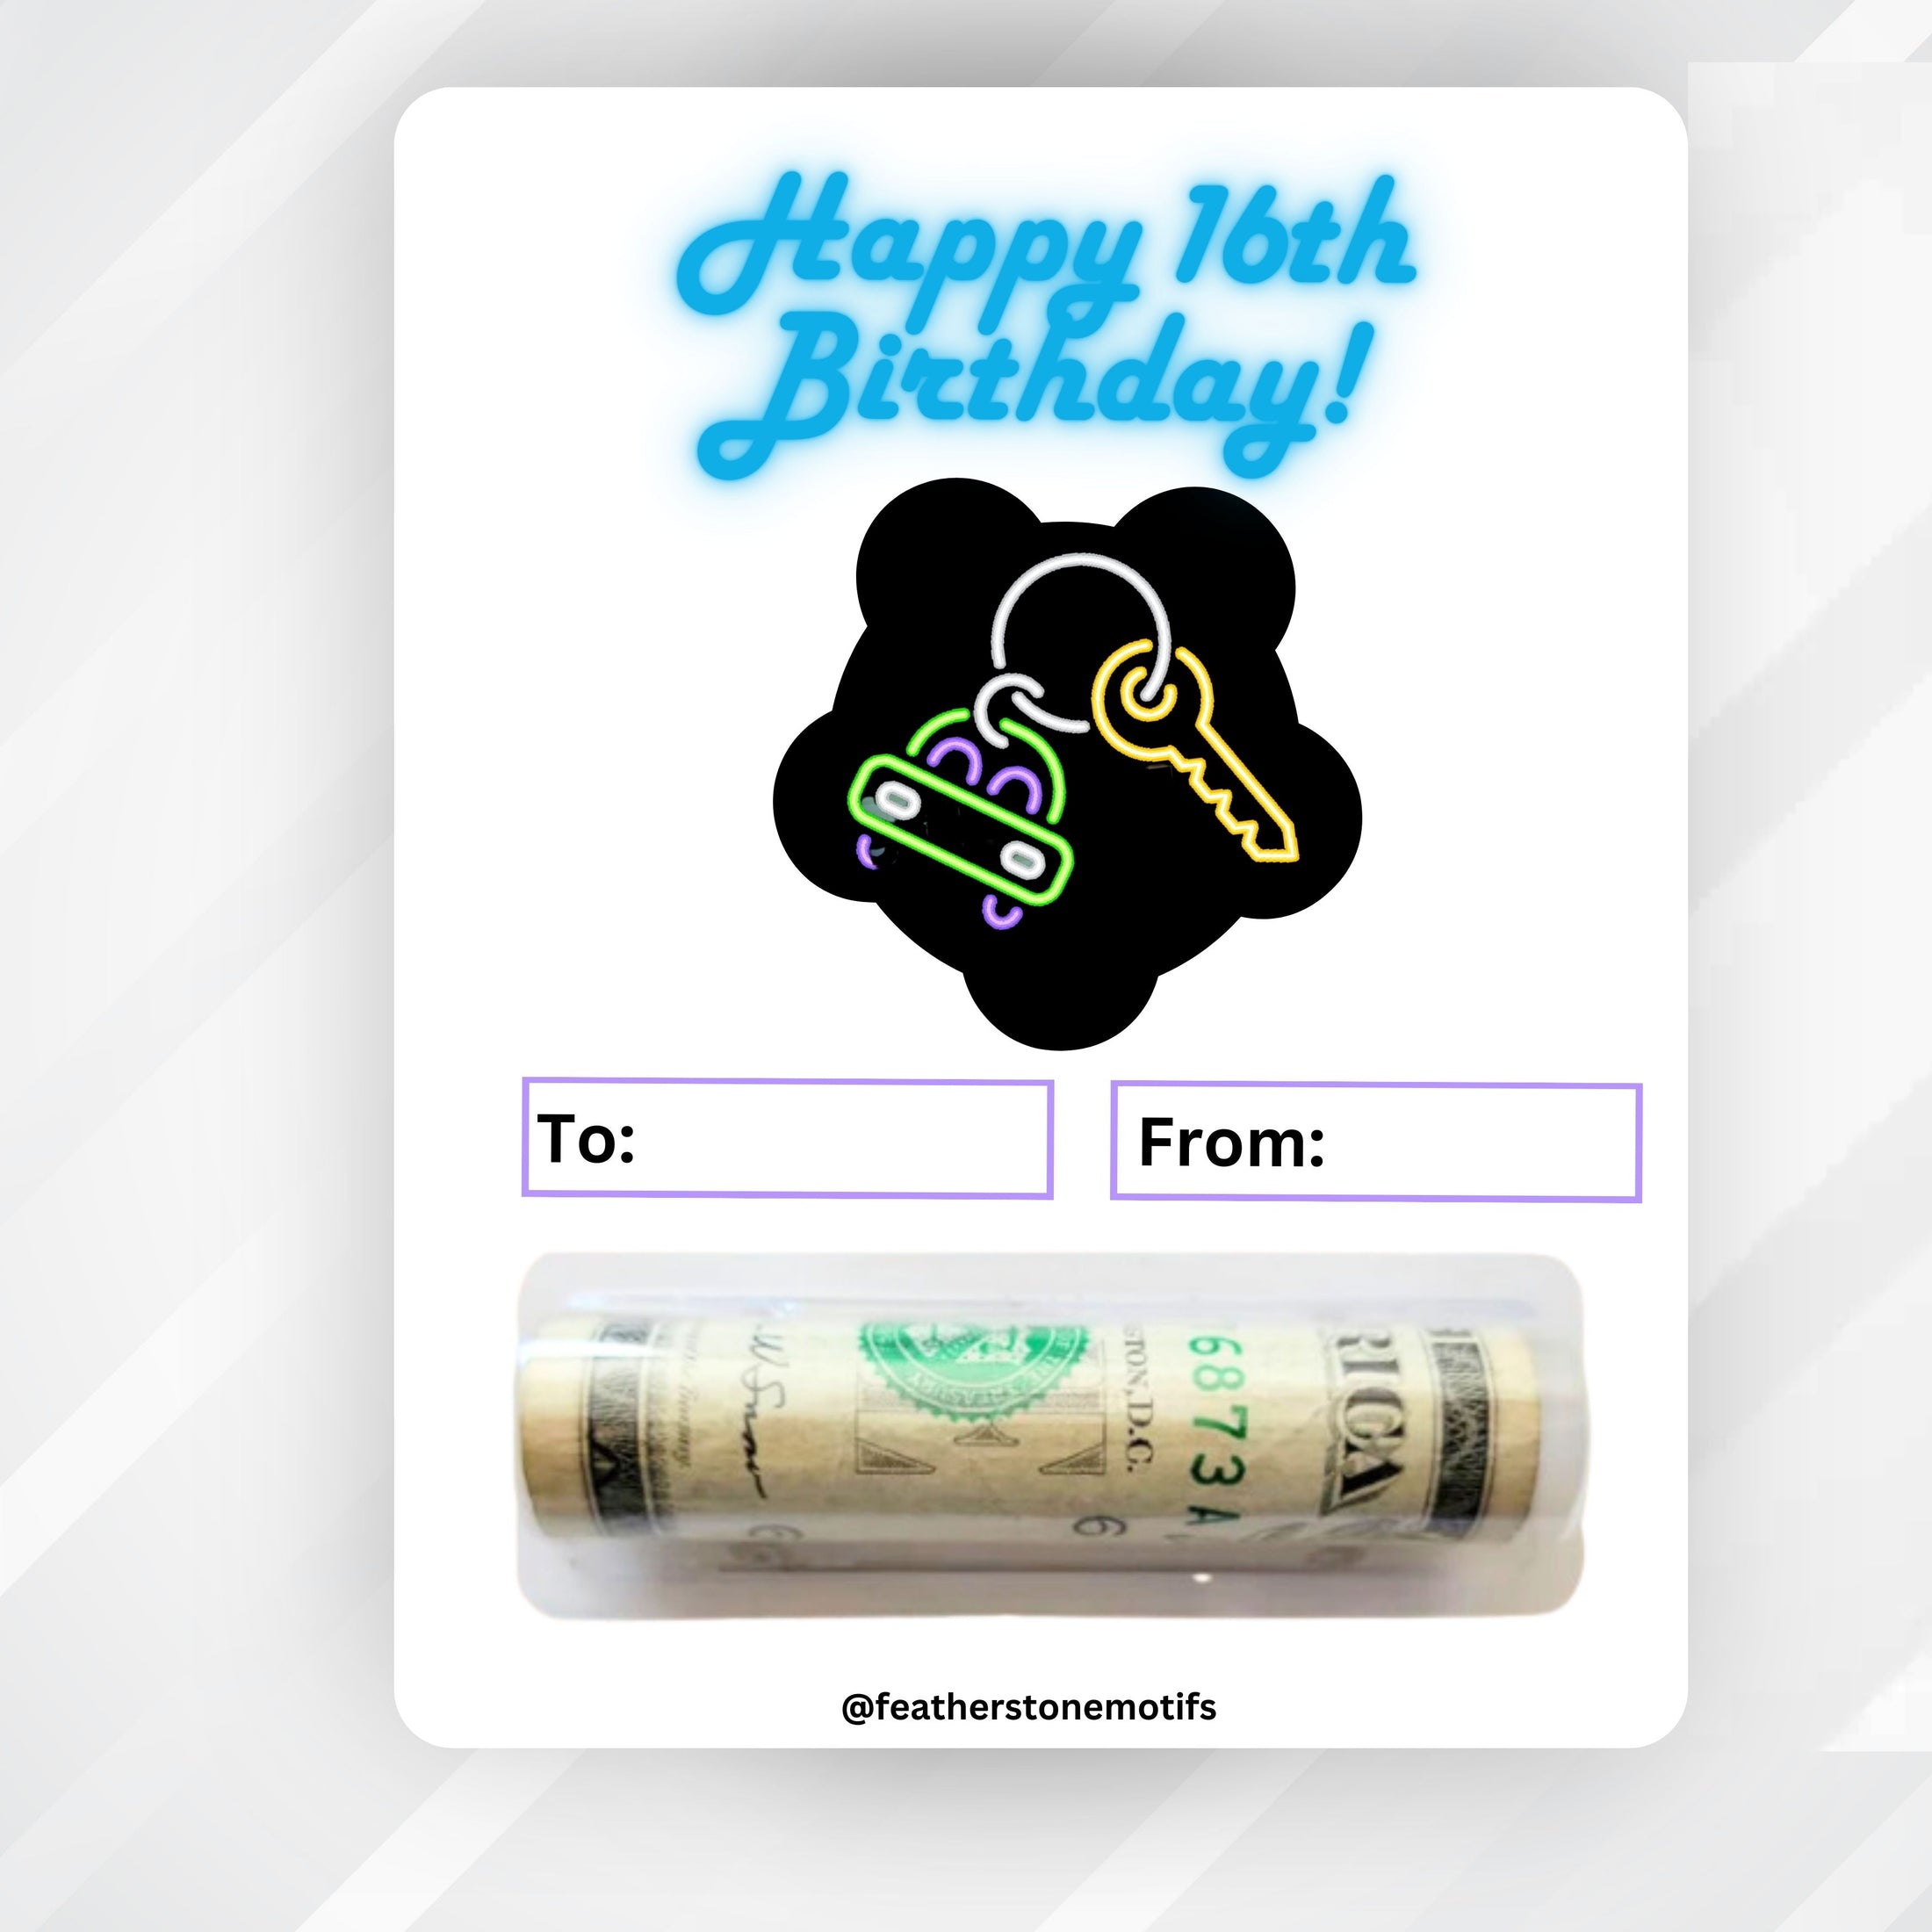 This image shows the money tube attached to the 16th Birthday Car Keys Money Card.